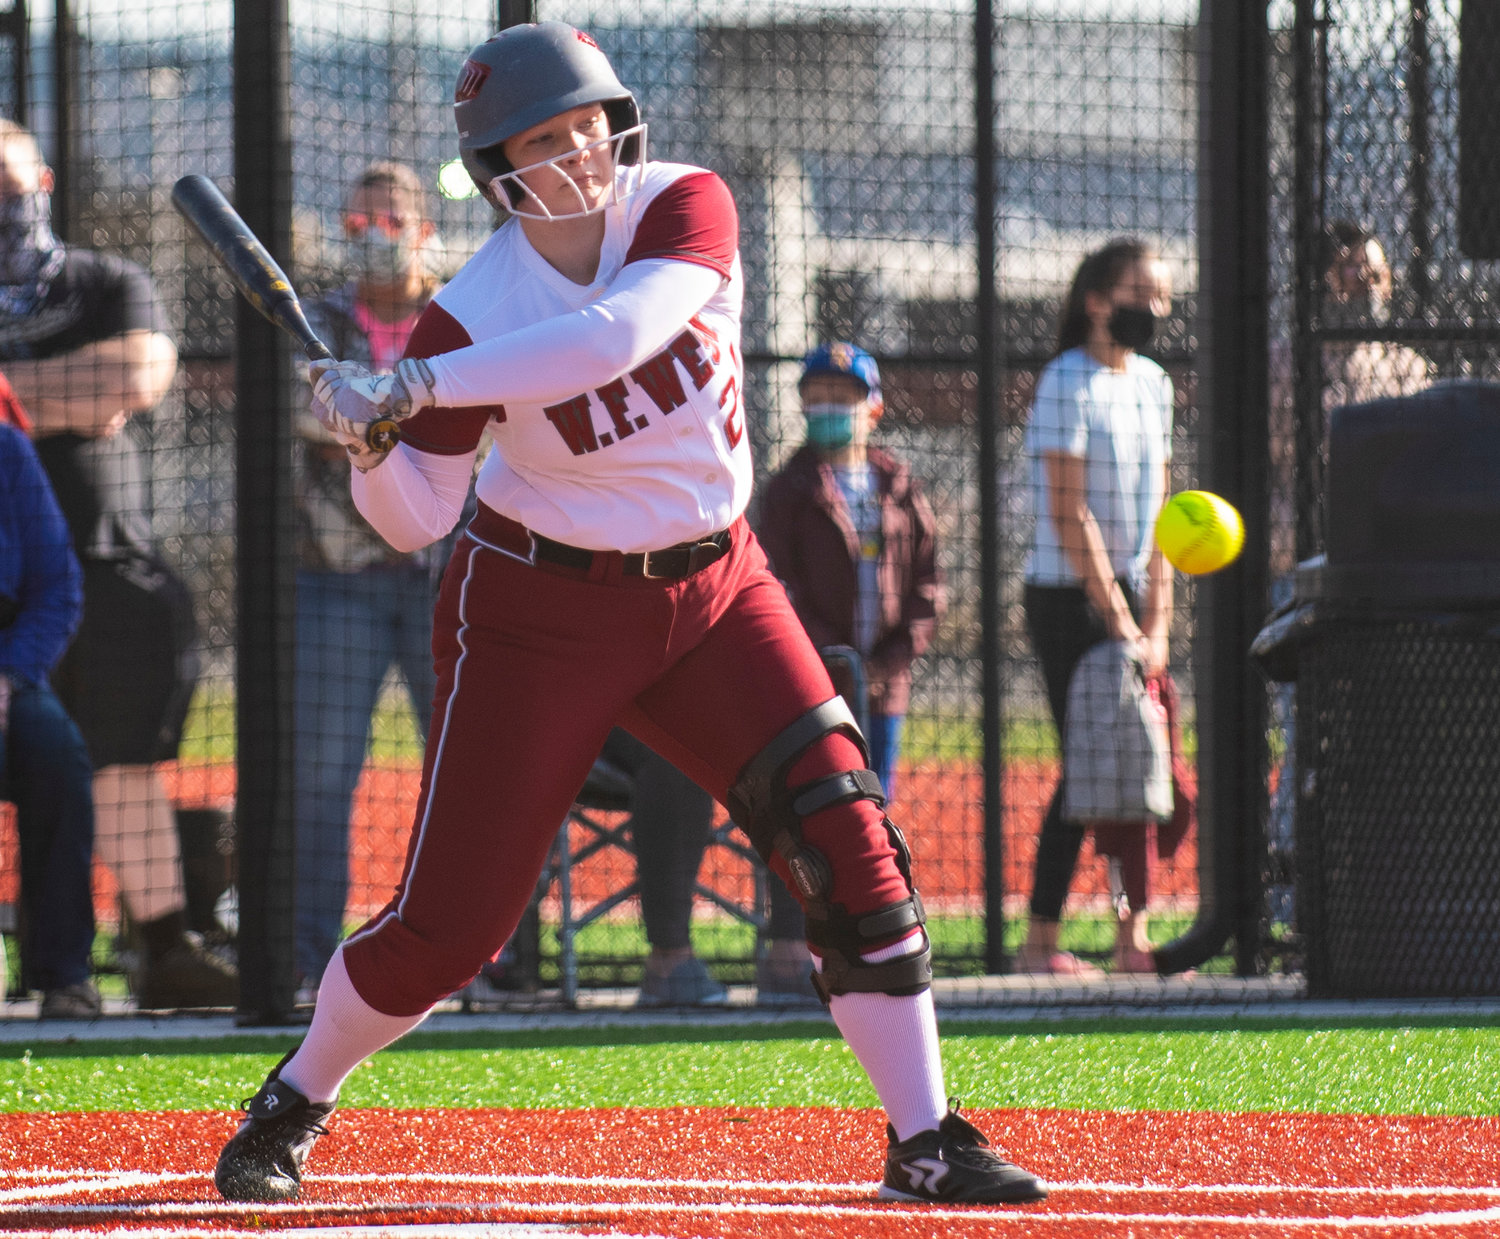 W.F. West sophomore Savannah Hawkins prepares to swing at a Rochester pitch on Wednesday.